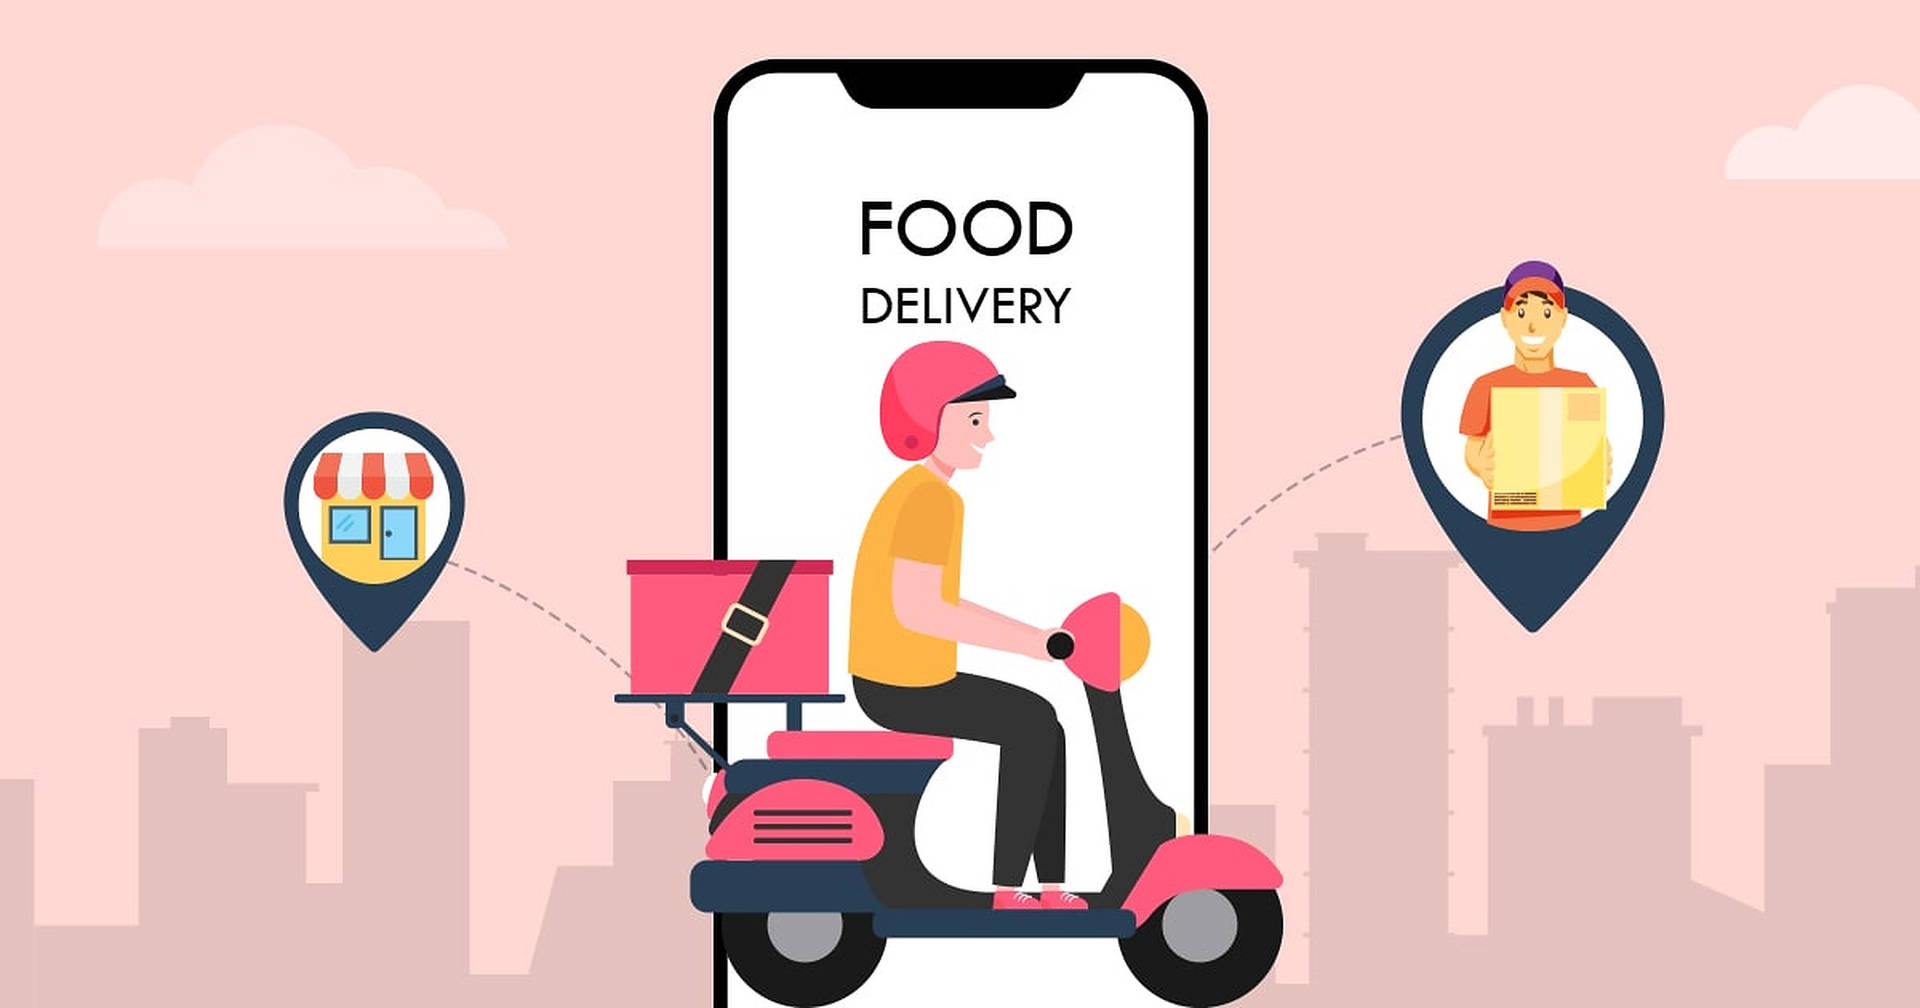 Food Delivery Wallpaper Images